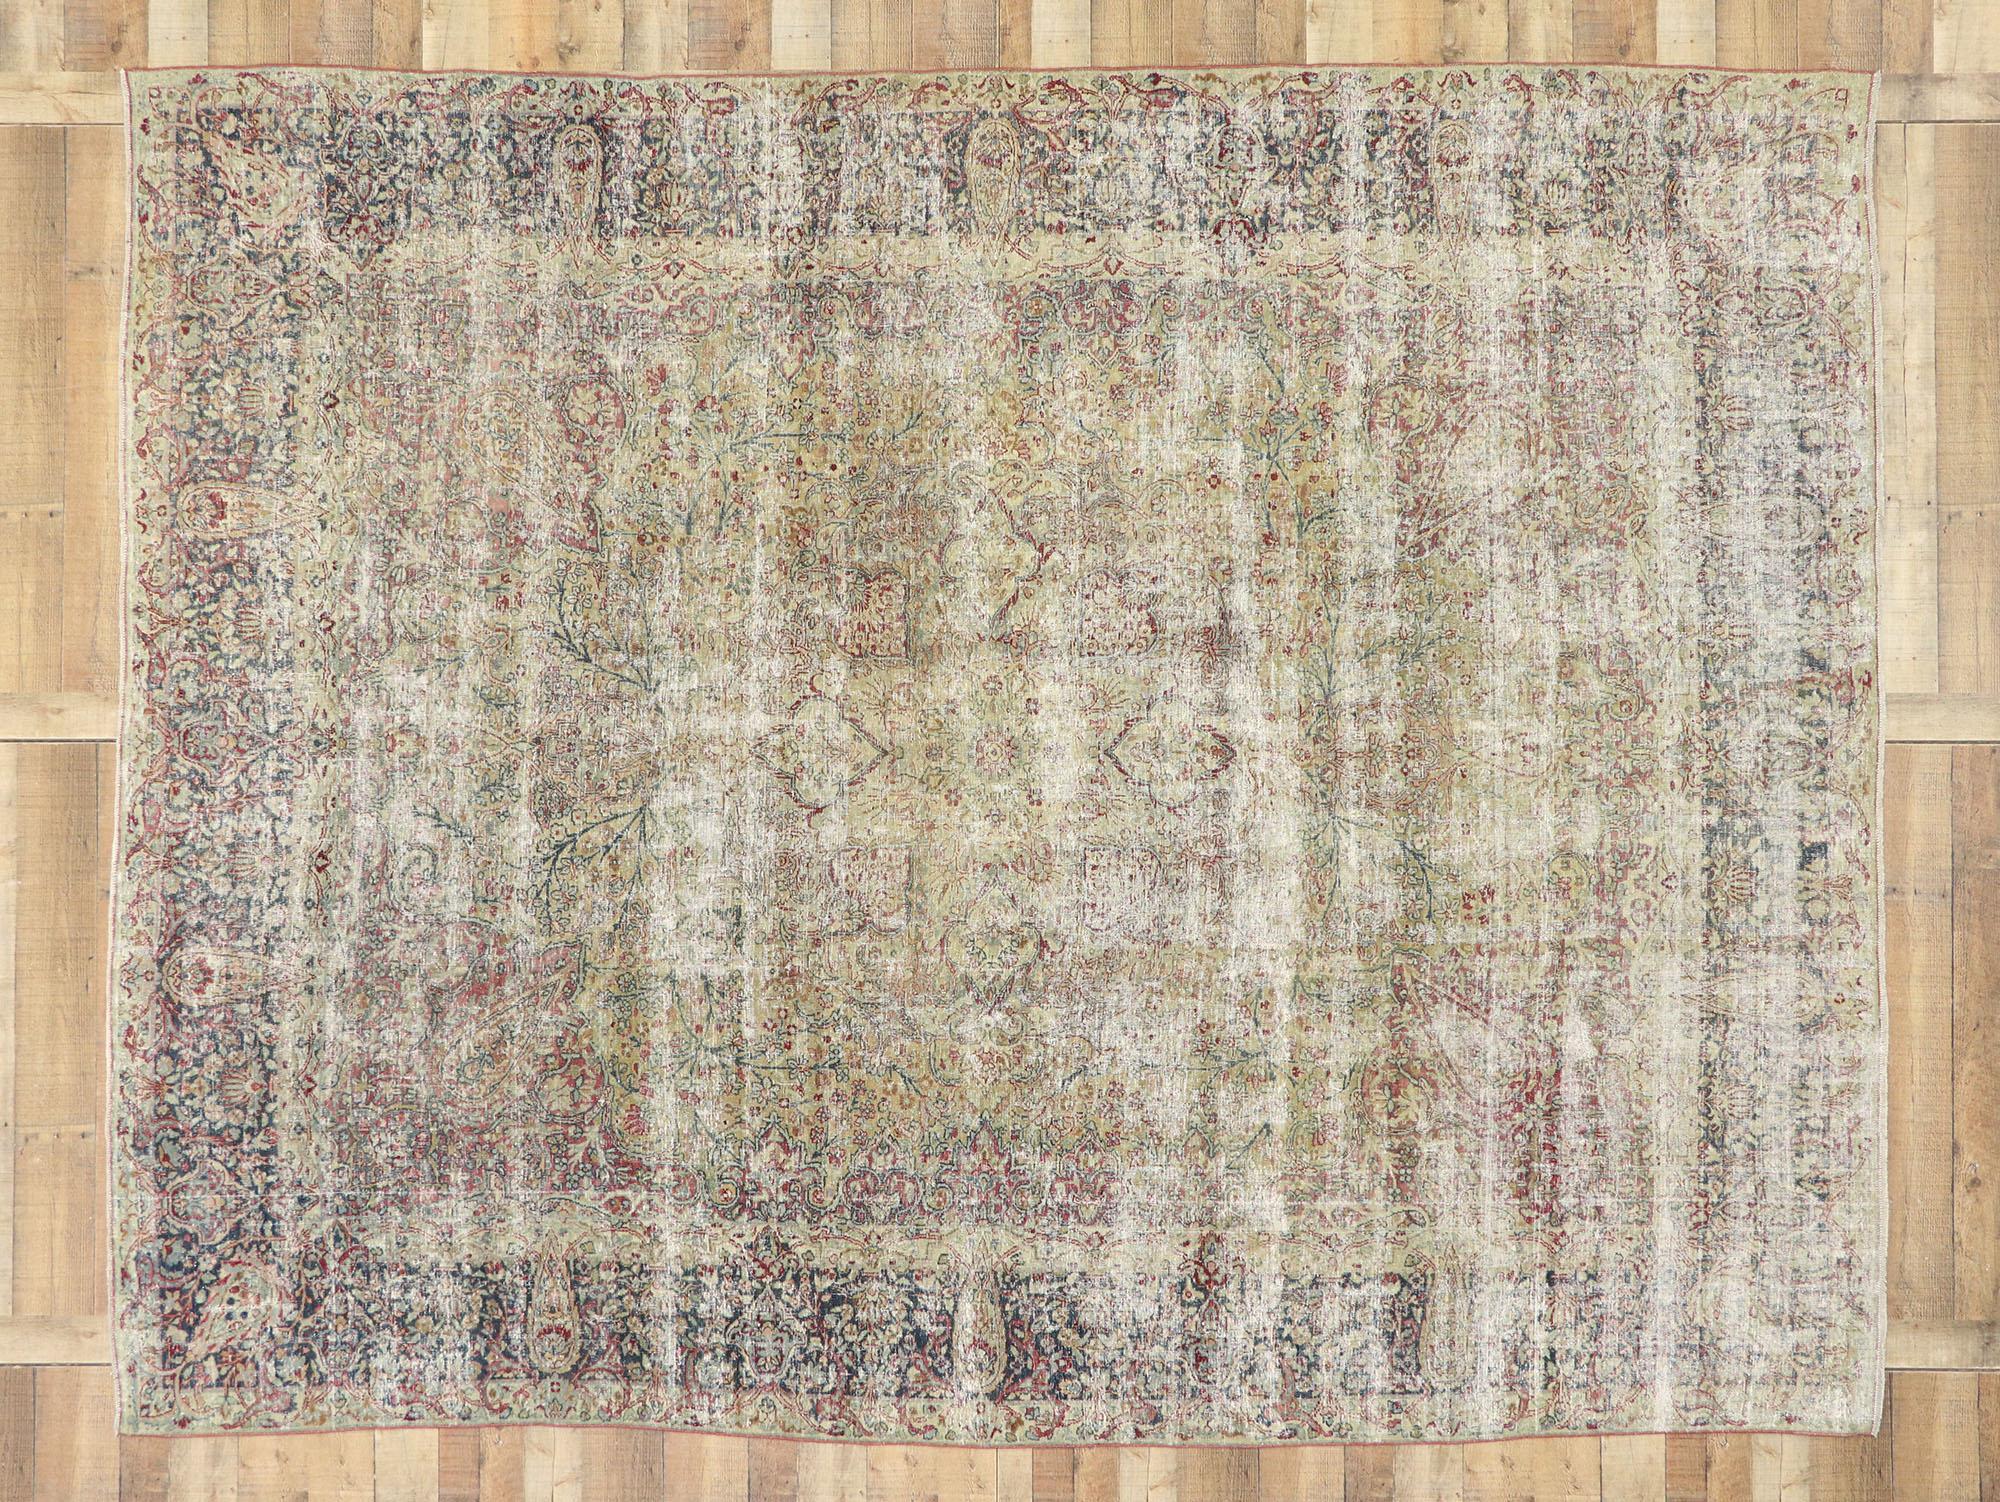 Distressed Antique Persian Kerman Rug with Modern Rustic English Cottage Style For Sale 5